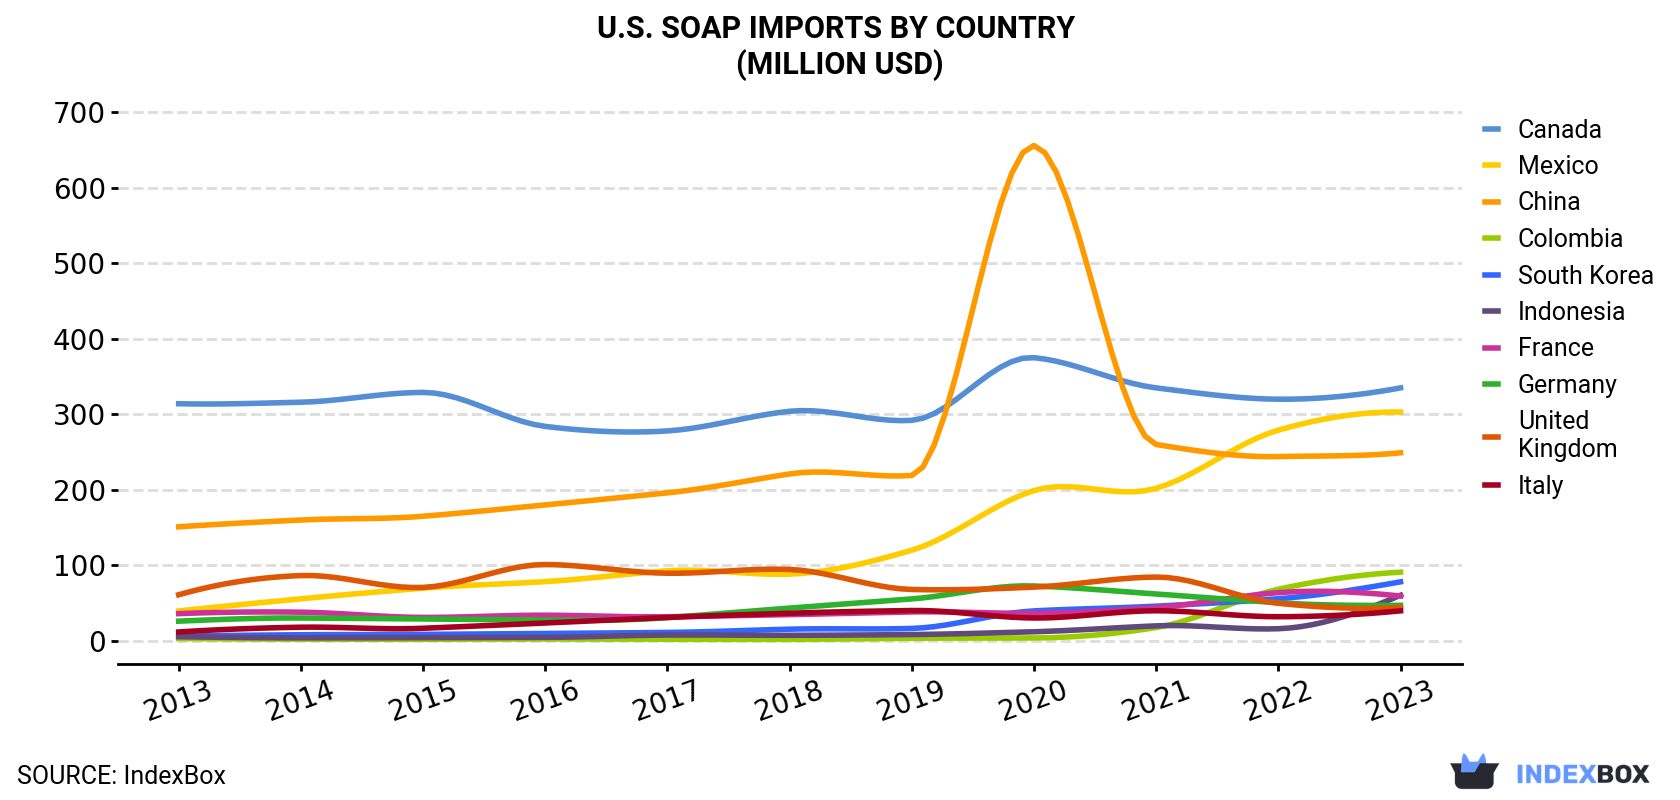 U.S. Soap Imports By Country (Million USD)